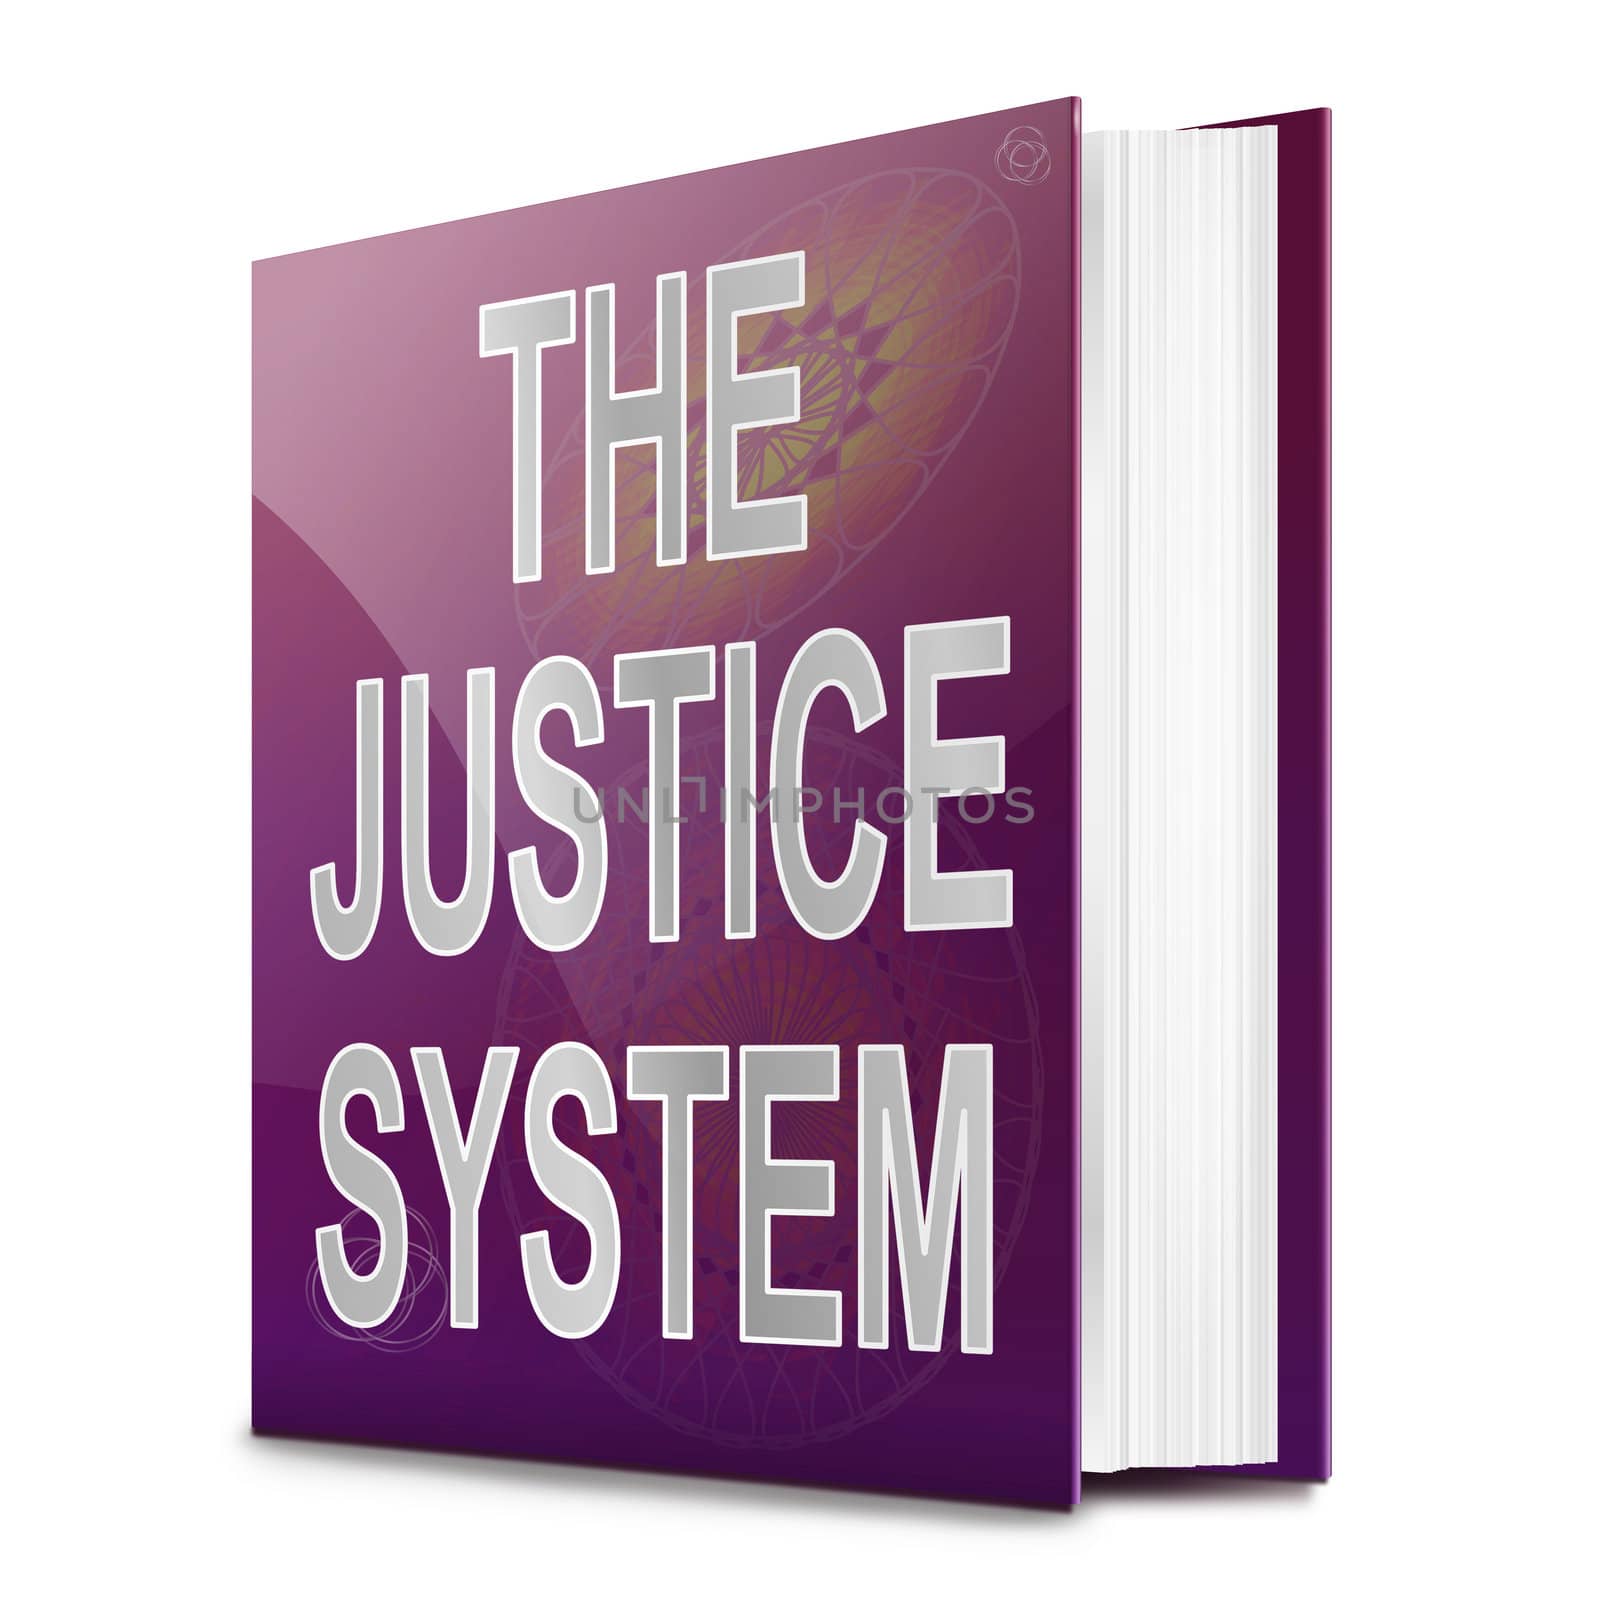 Justice system text book. by 72soul